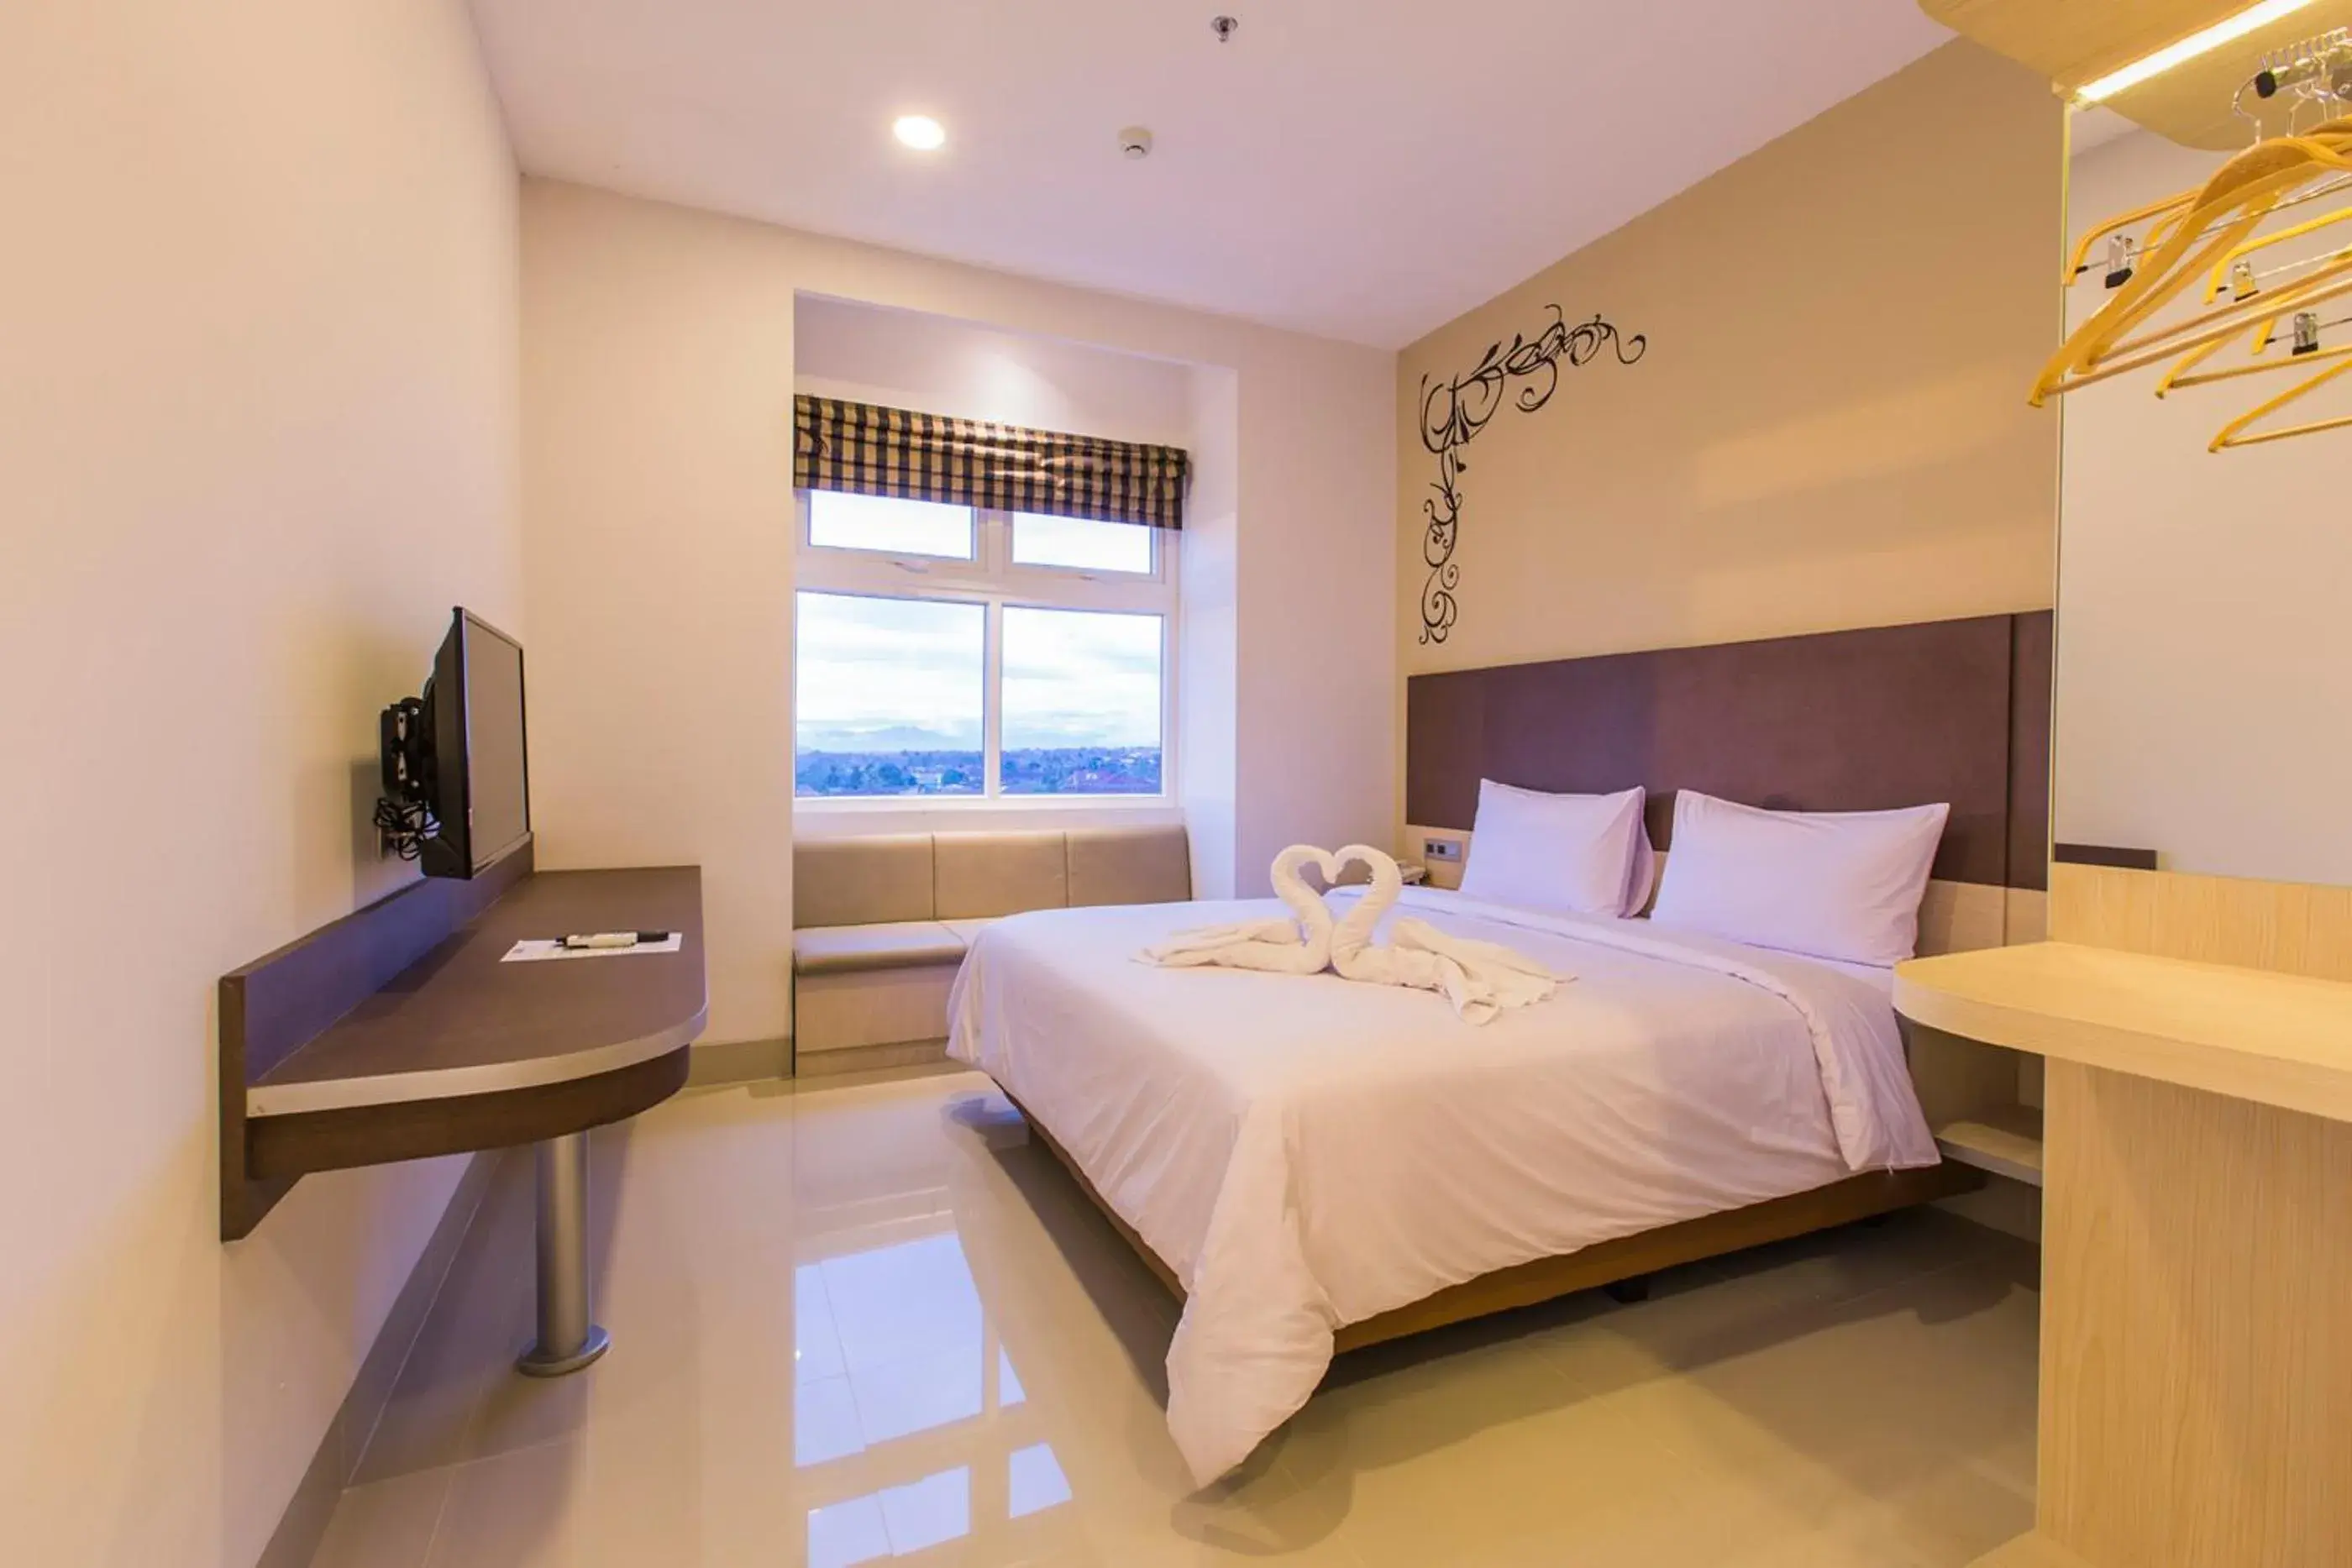 Bedroom in Sparks Odeon Sukabumi